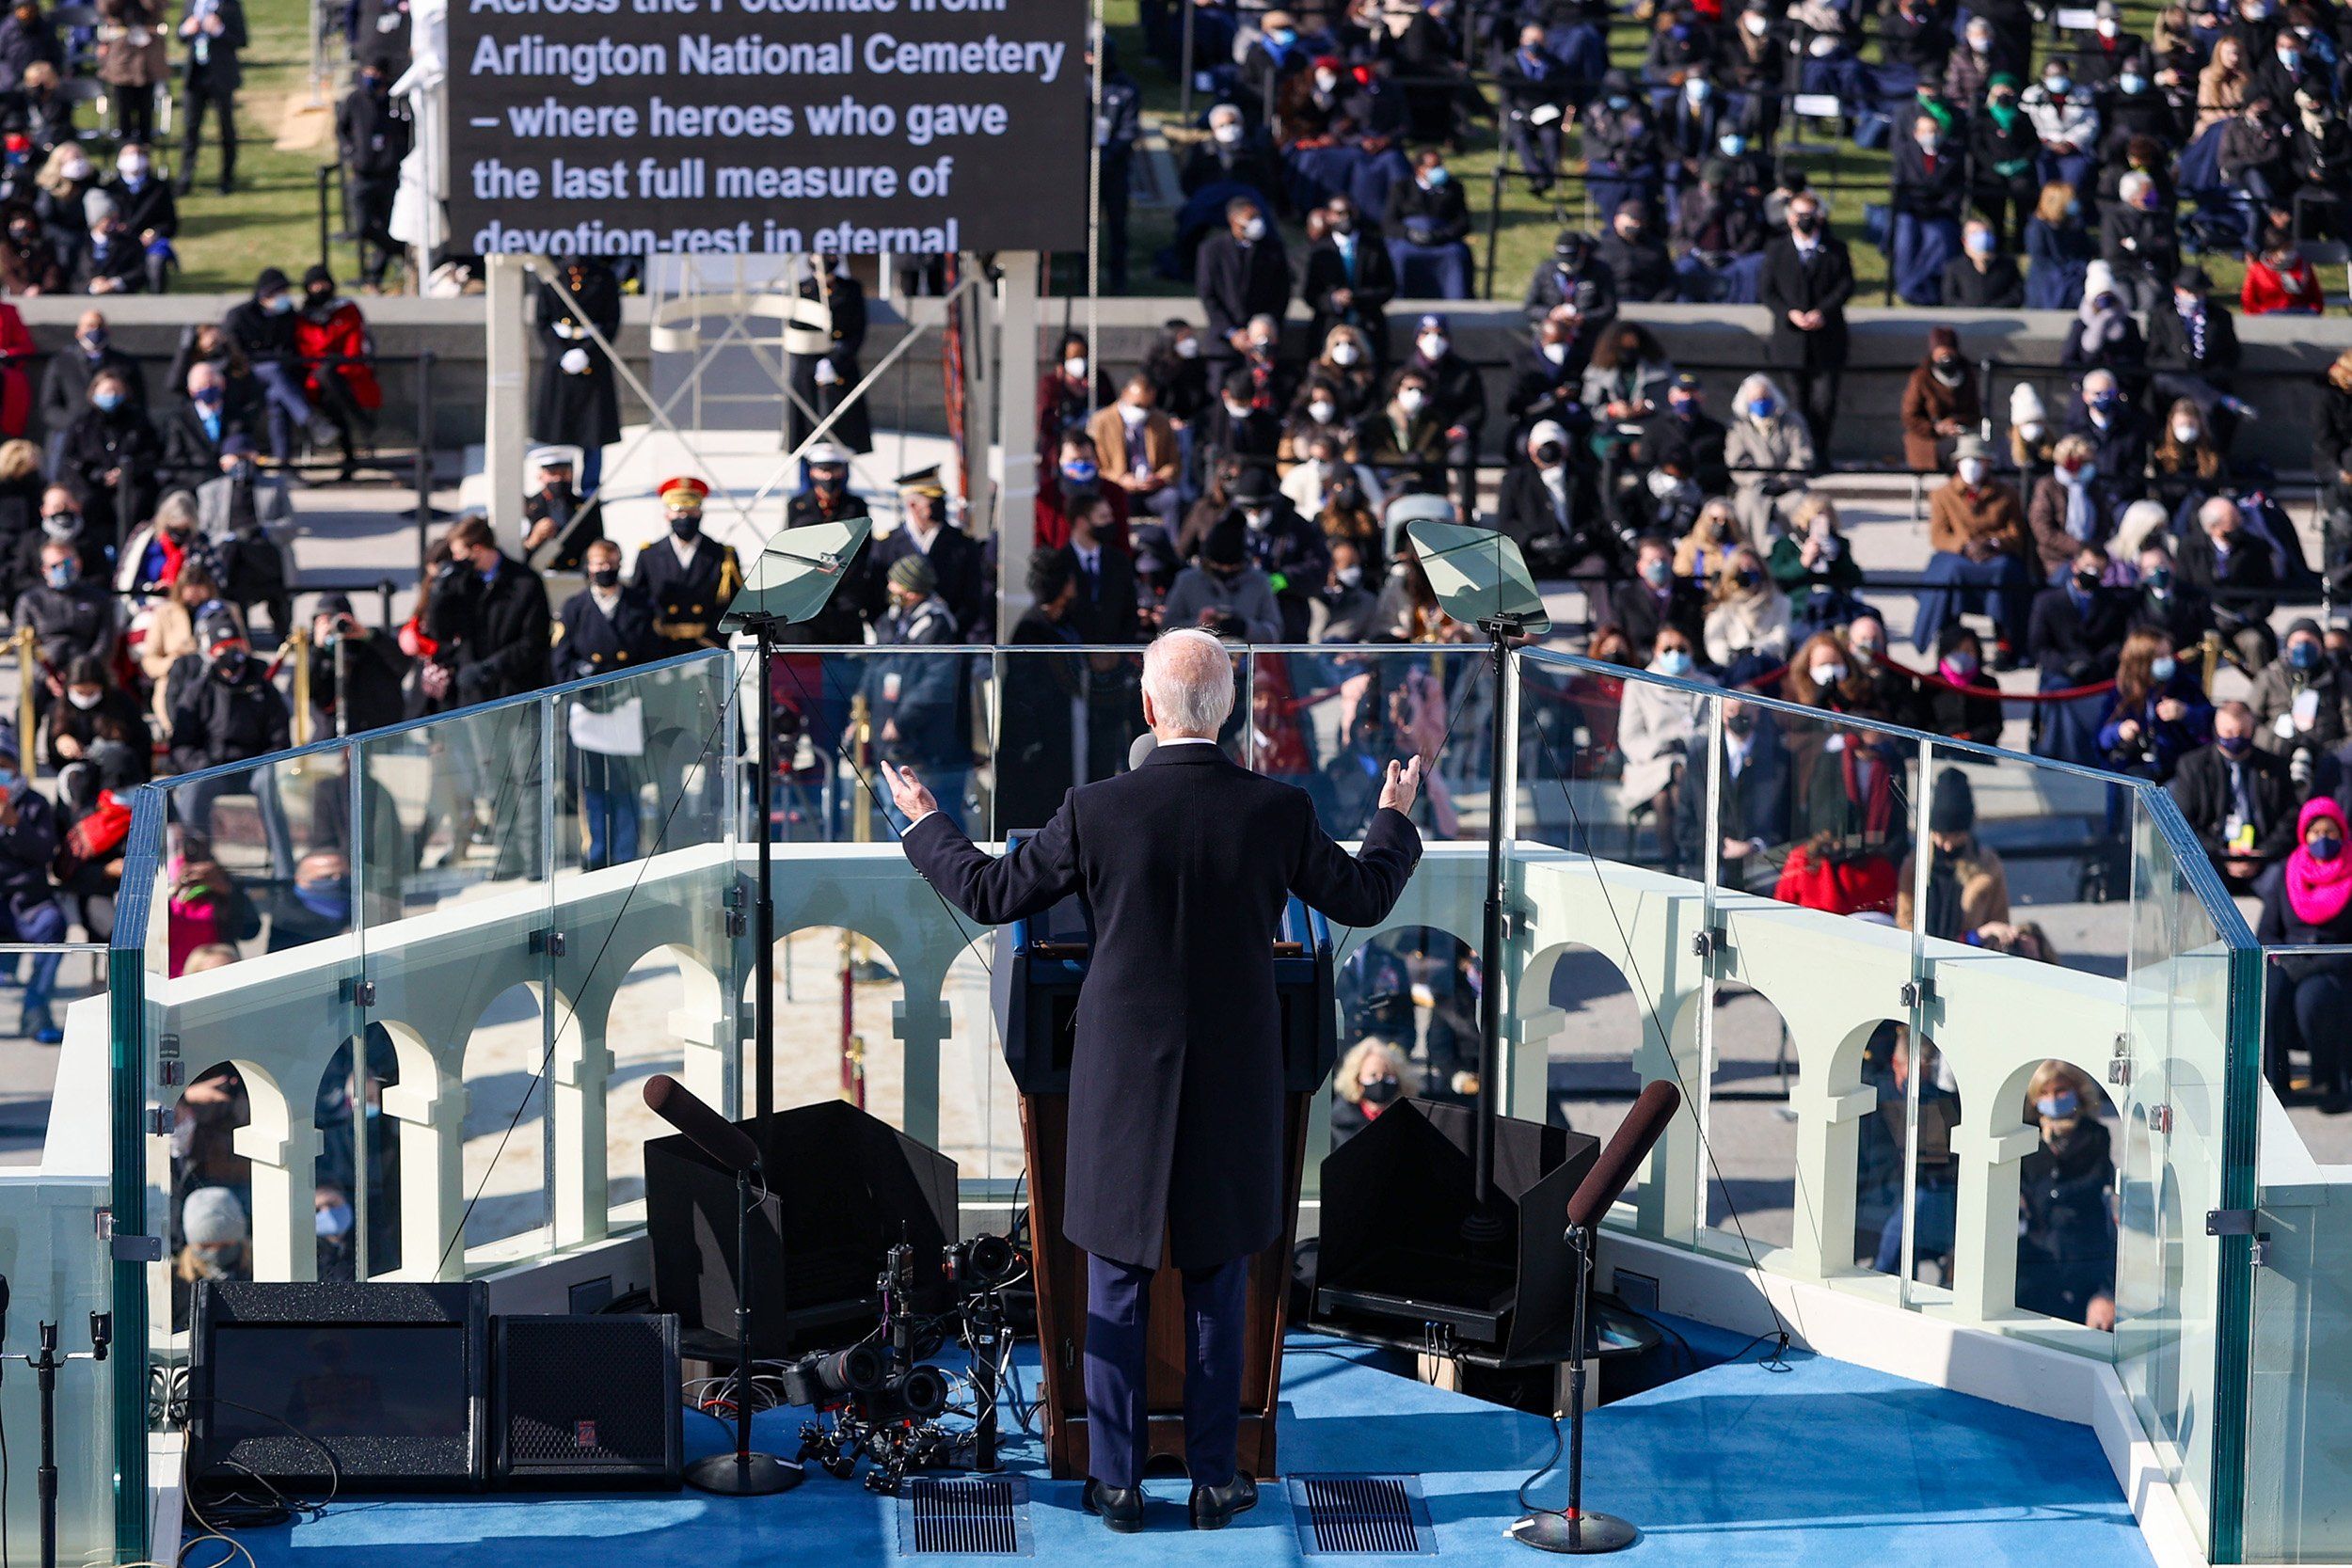 WASHINGTON, DC - JANUARY 20: U.S. President Joe Biden delivers his inaugural address on the West Front of the U.S. Capitol on January 20, 2021 in Washington, DC. During today's inauguration ceremony Joe Biden becomes the 46th president of the United States. (Photo by Tasos Katopodis/Getty Images)